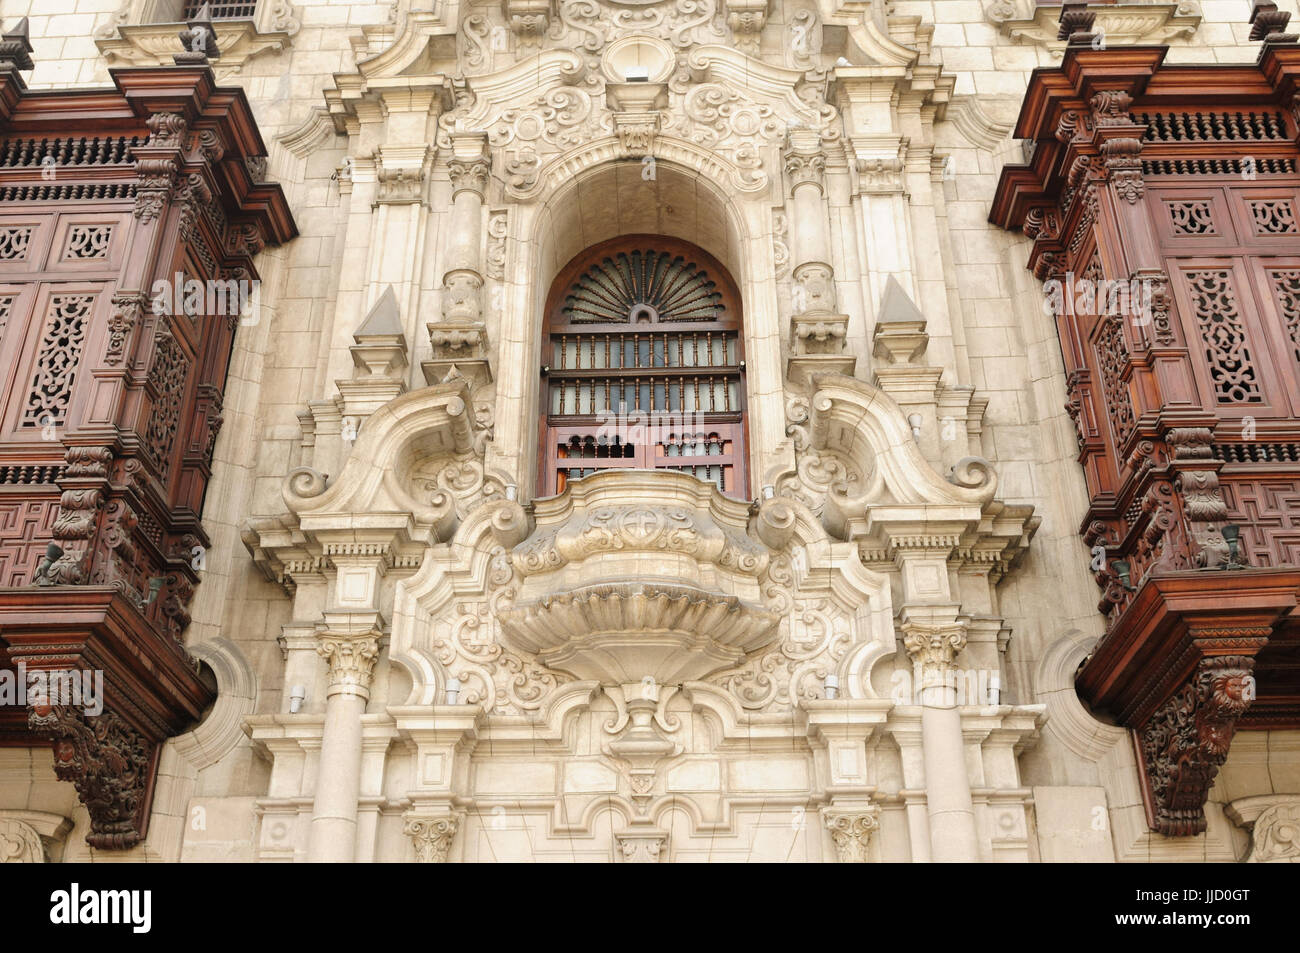 Lima - capital of Peru. Cityscape - Plaza de Armas - main squer in town - colonial architecture detail Stock Photo